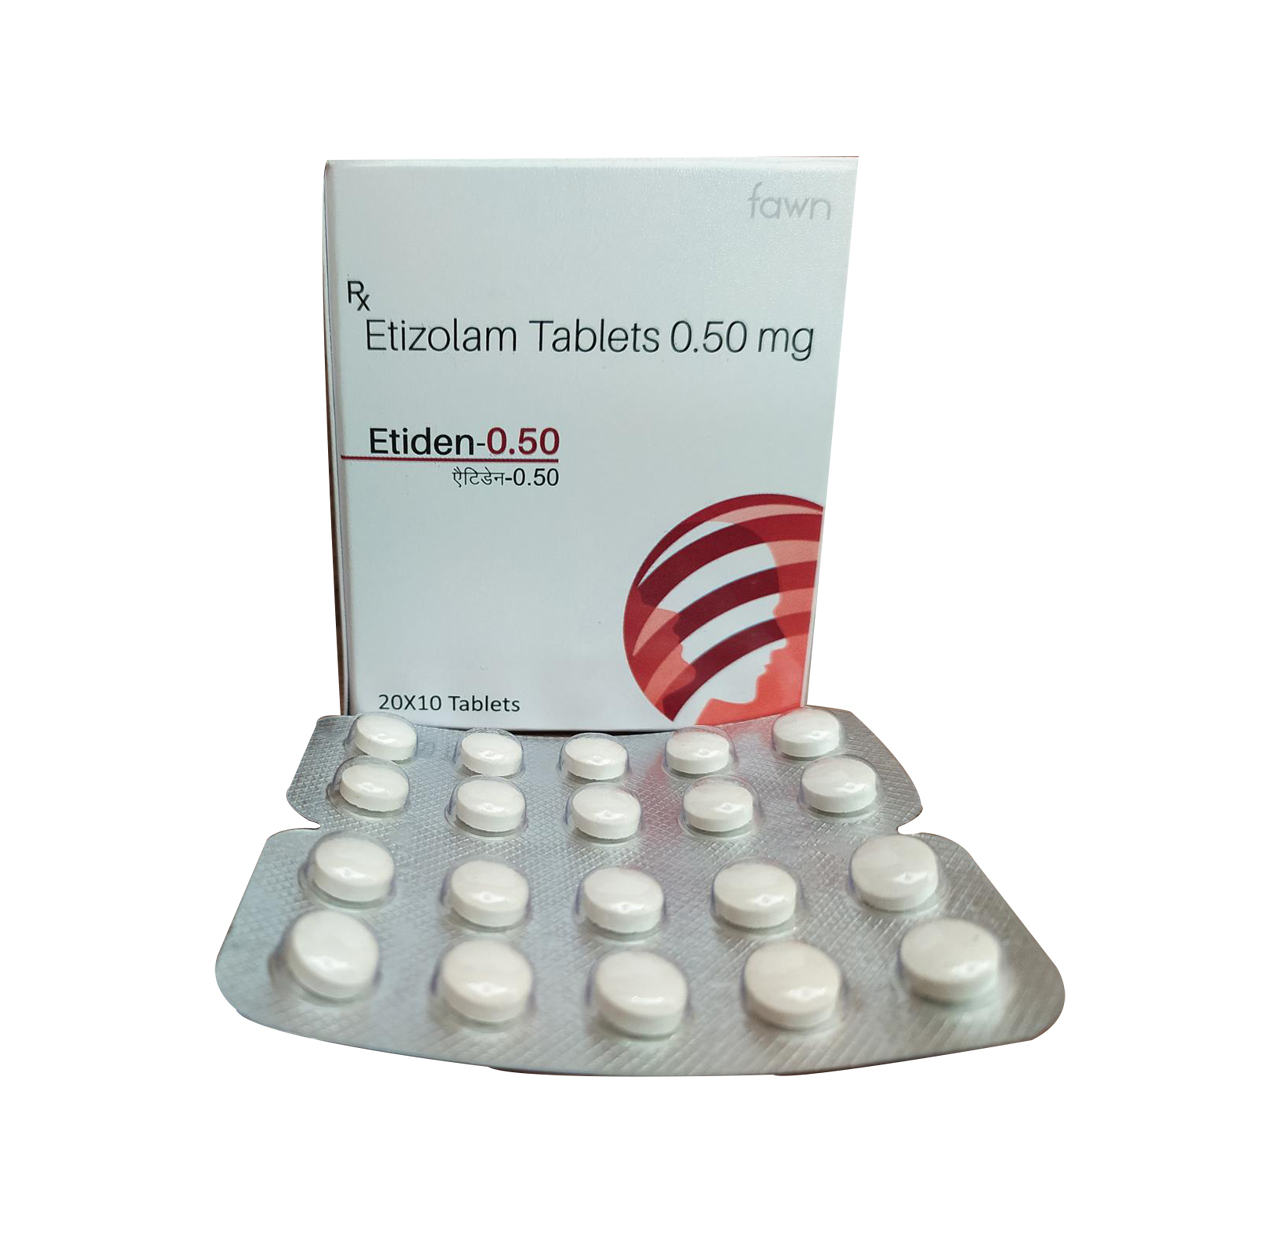 Product Name: ETIDEN 0.50, Compositions of Etizolam 0.5mg are Etizolam 0.5mg - Fawn Incorporation